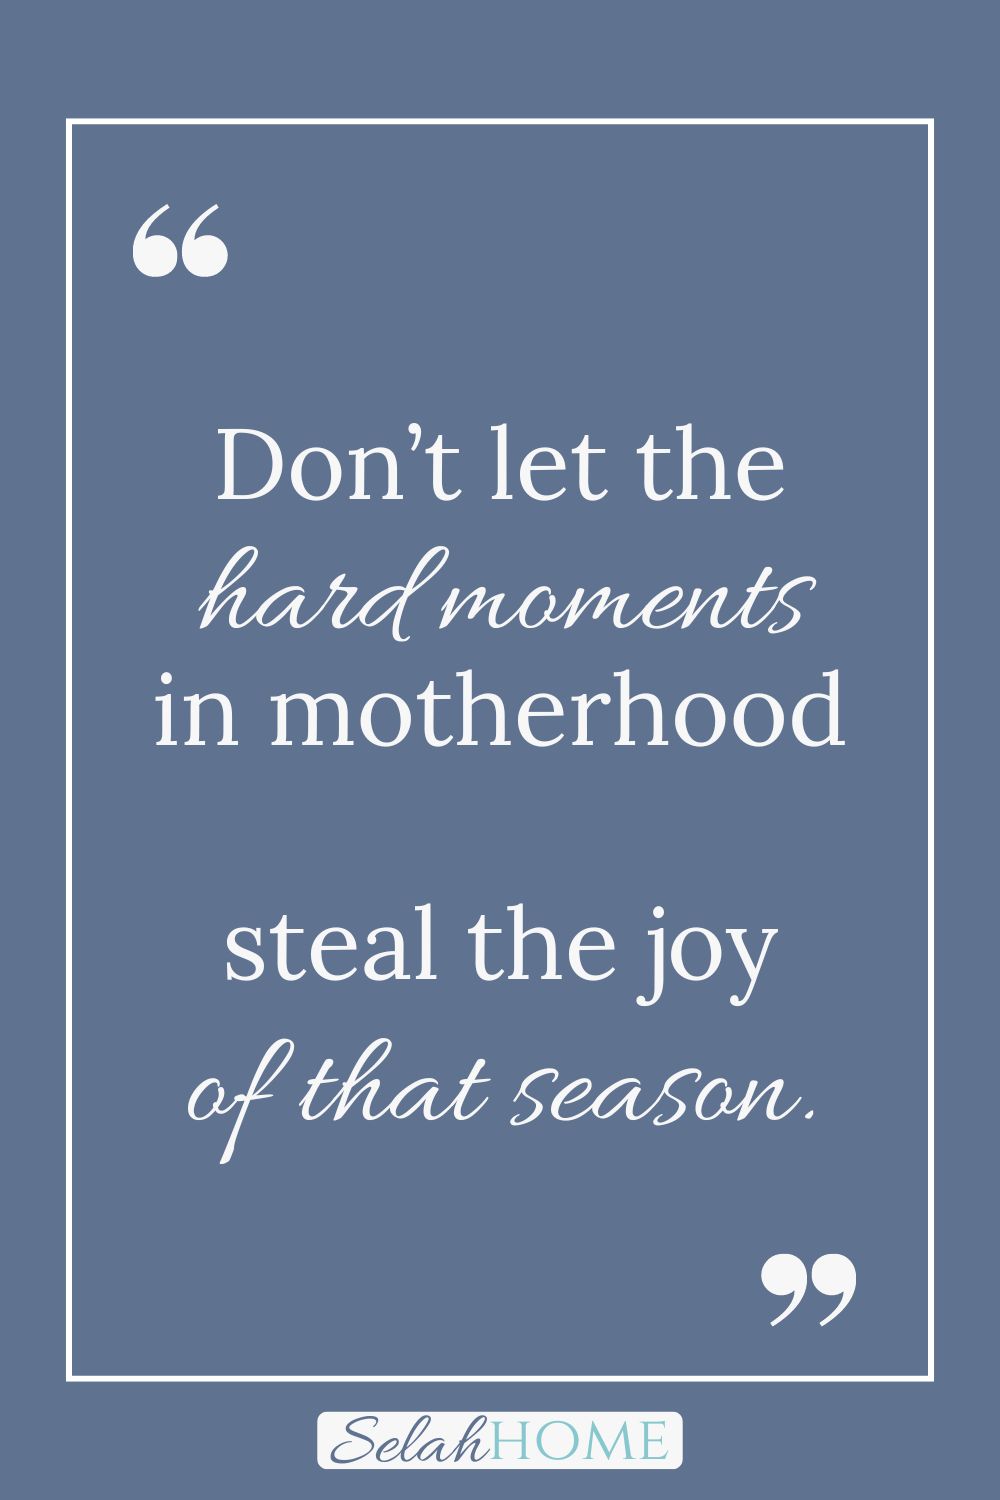 A quote for this post about embracing motherhood that reads, "Don't let the hard moments in motherhood steal the joy of that season."